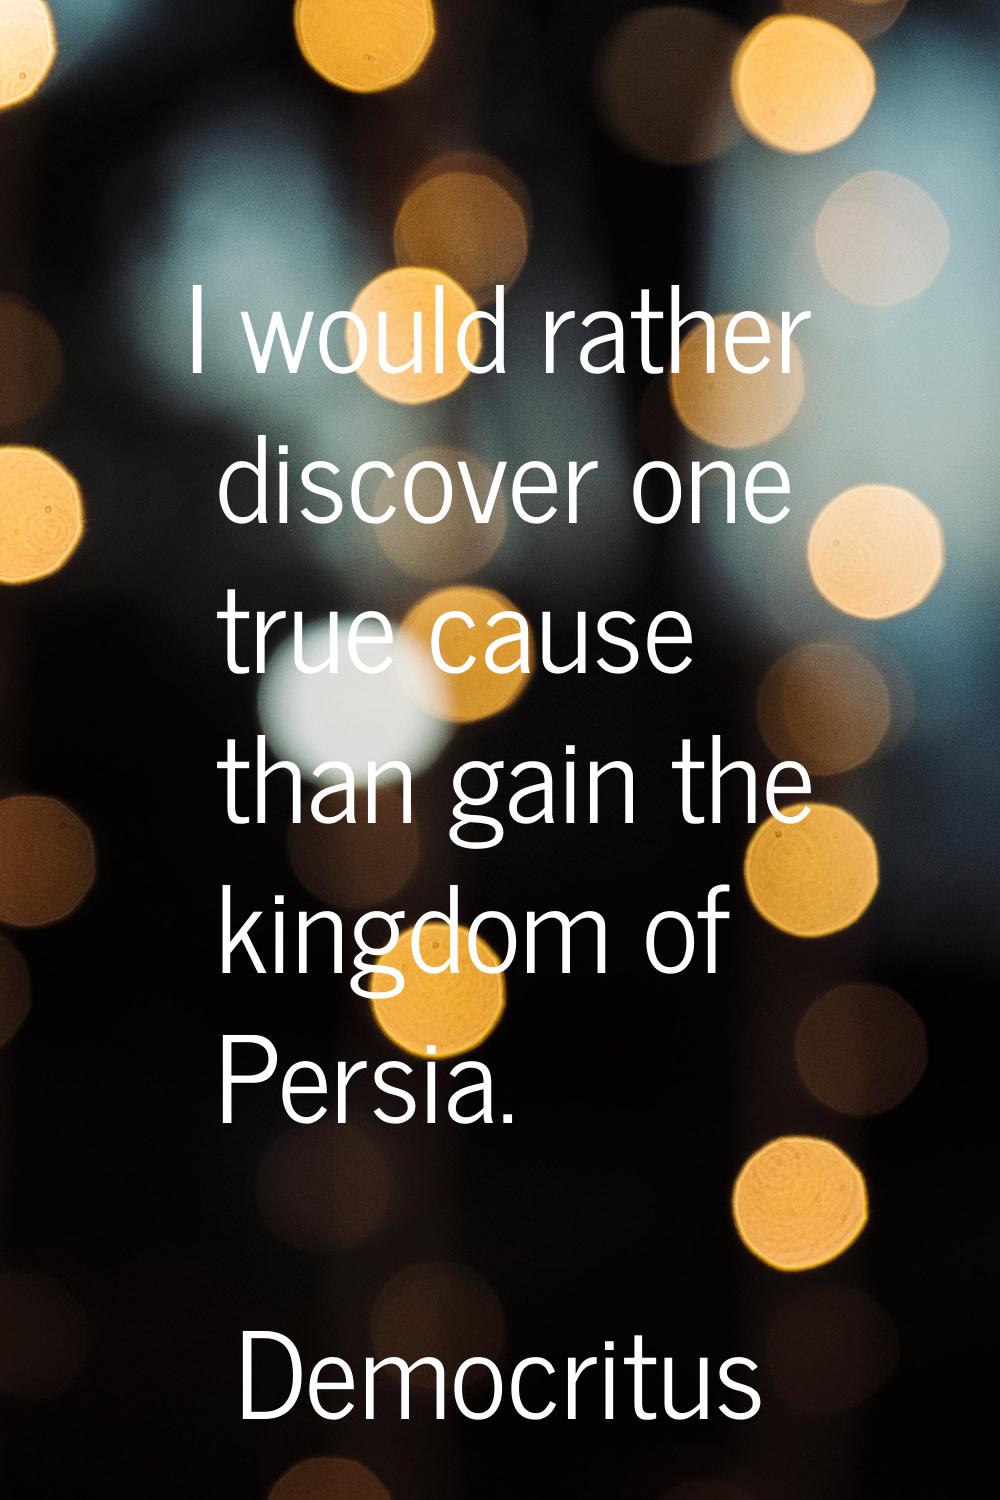 I would rather discover one true cause than gain the kingdom of Persia.